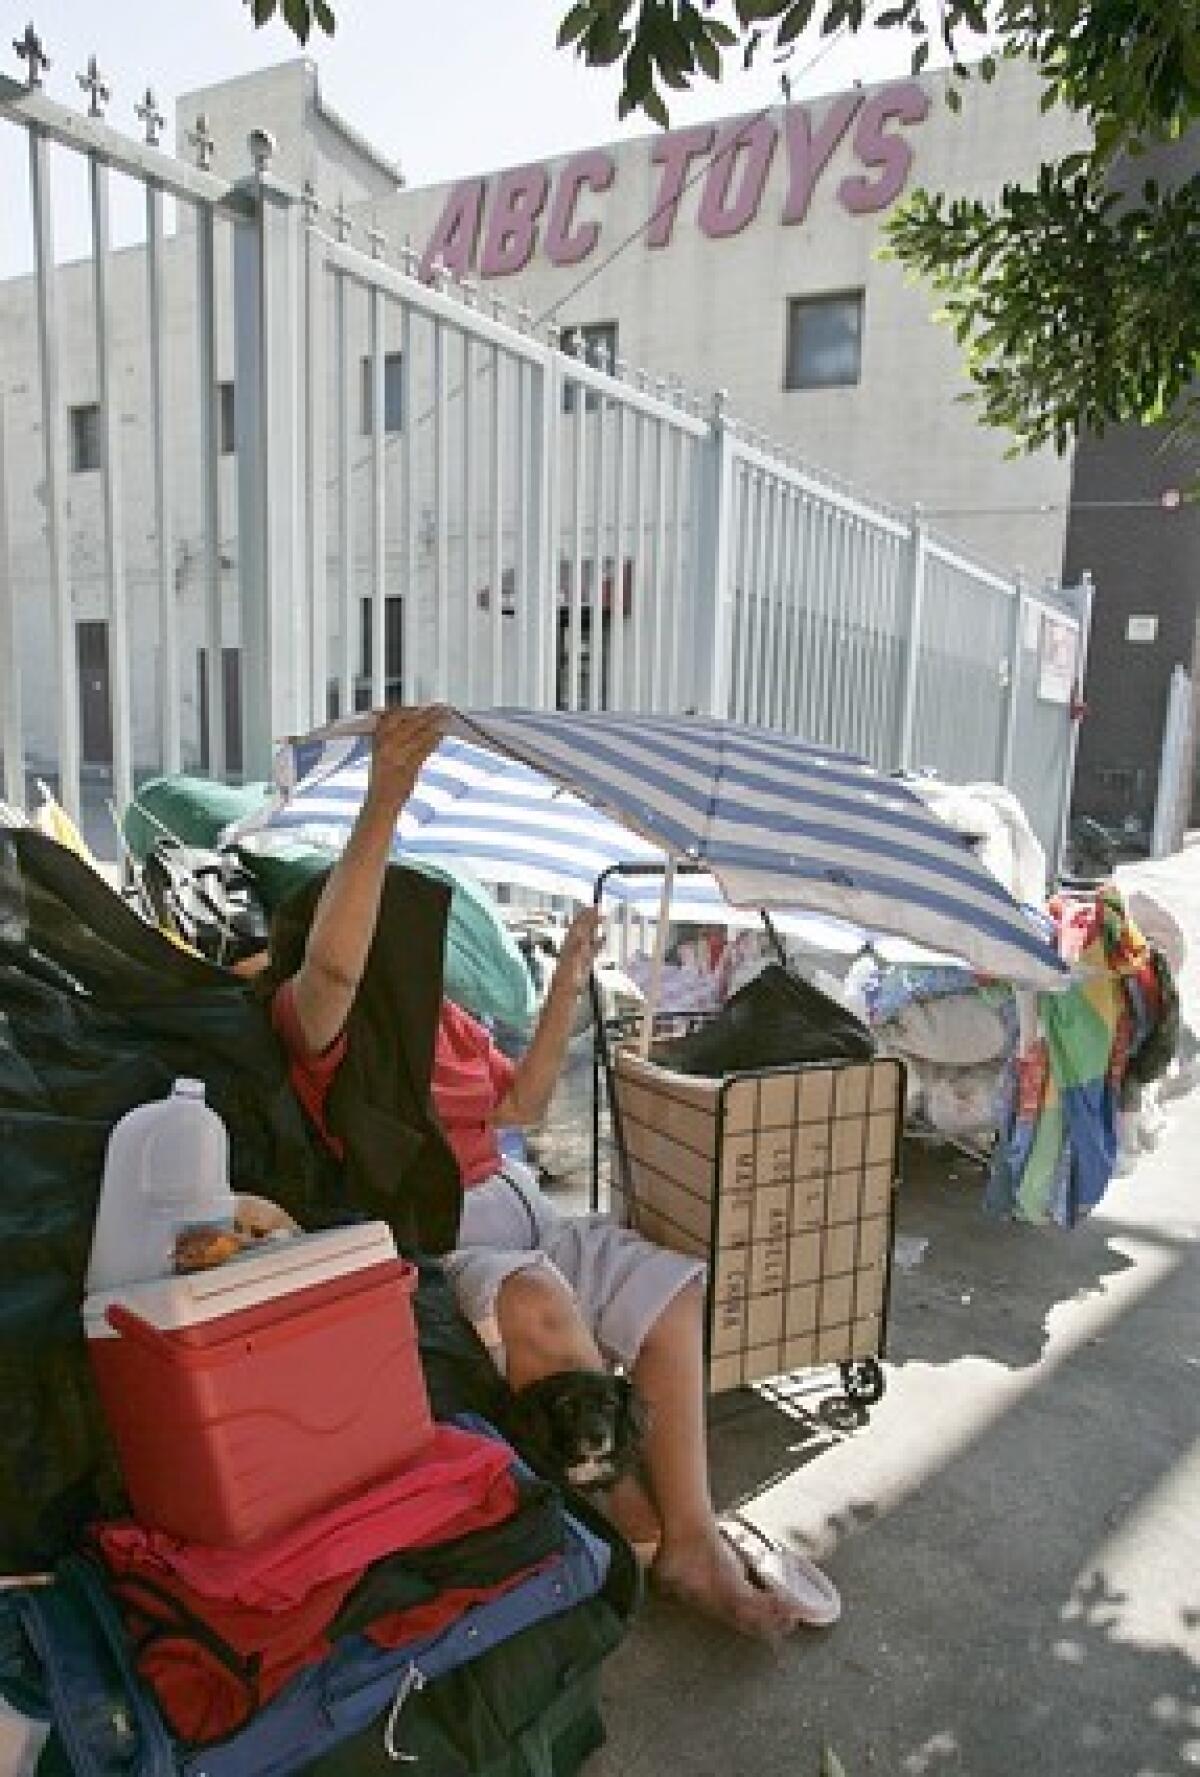 SKID ROW: San Pedro Street merchants say the homeless situation has deteriorated badly in recent months.